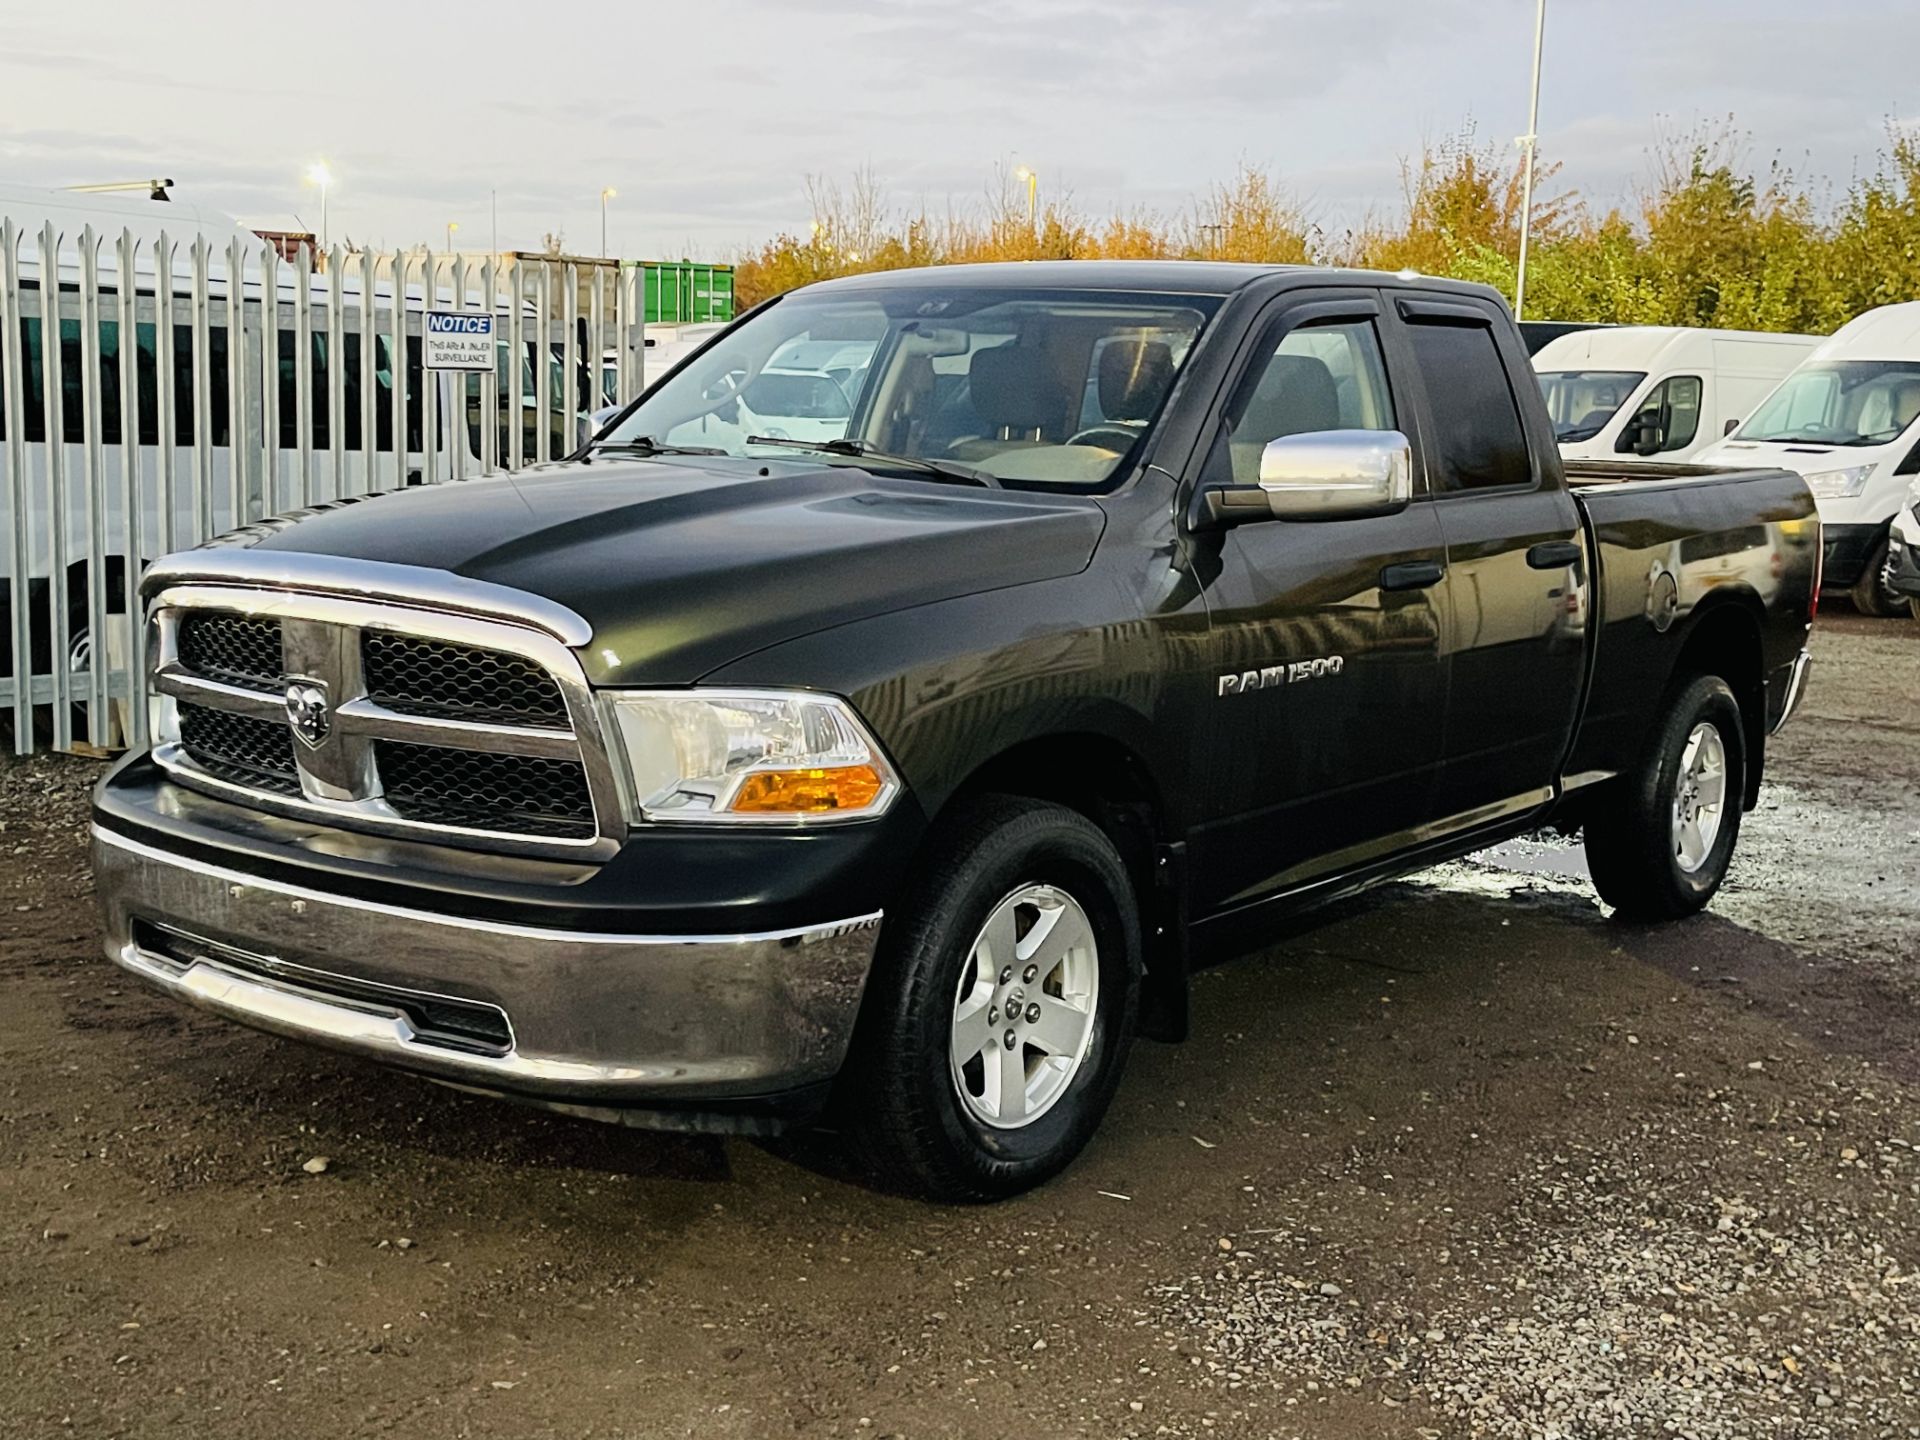 Dodge Ram 4.7 V8 1500 ST 4WD ' 2012 Year ' A/C - Cruise Control - 6 Seats - Chrome Pack